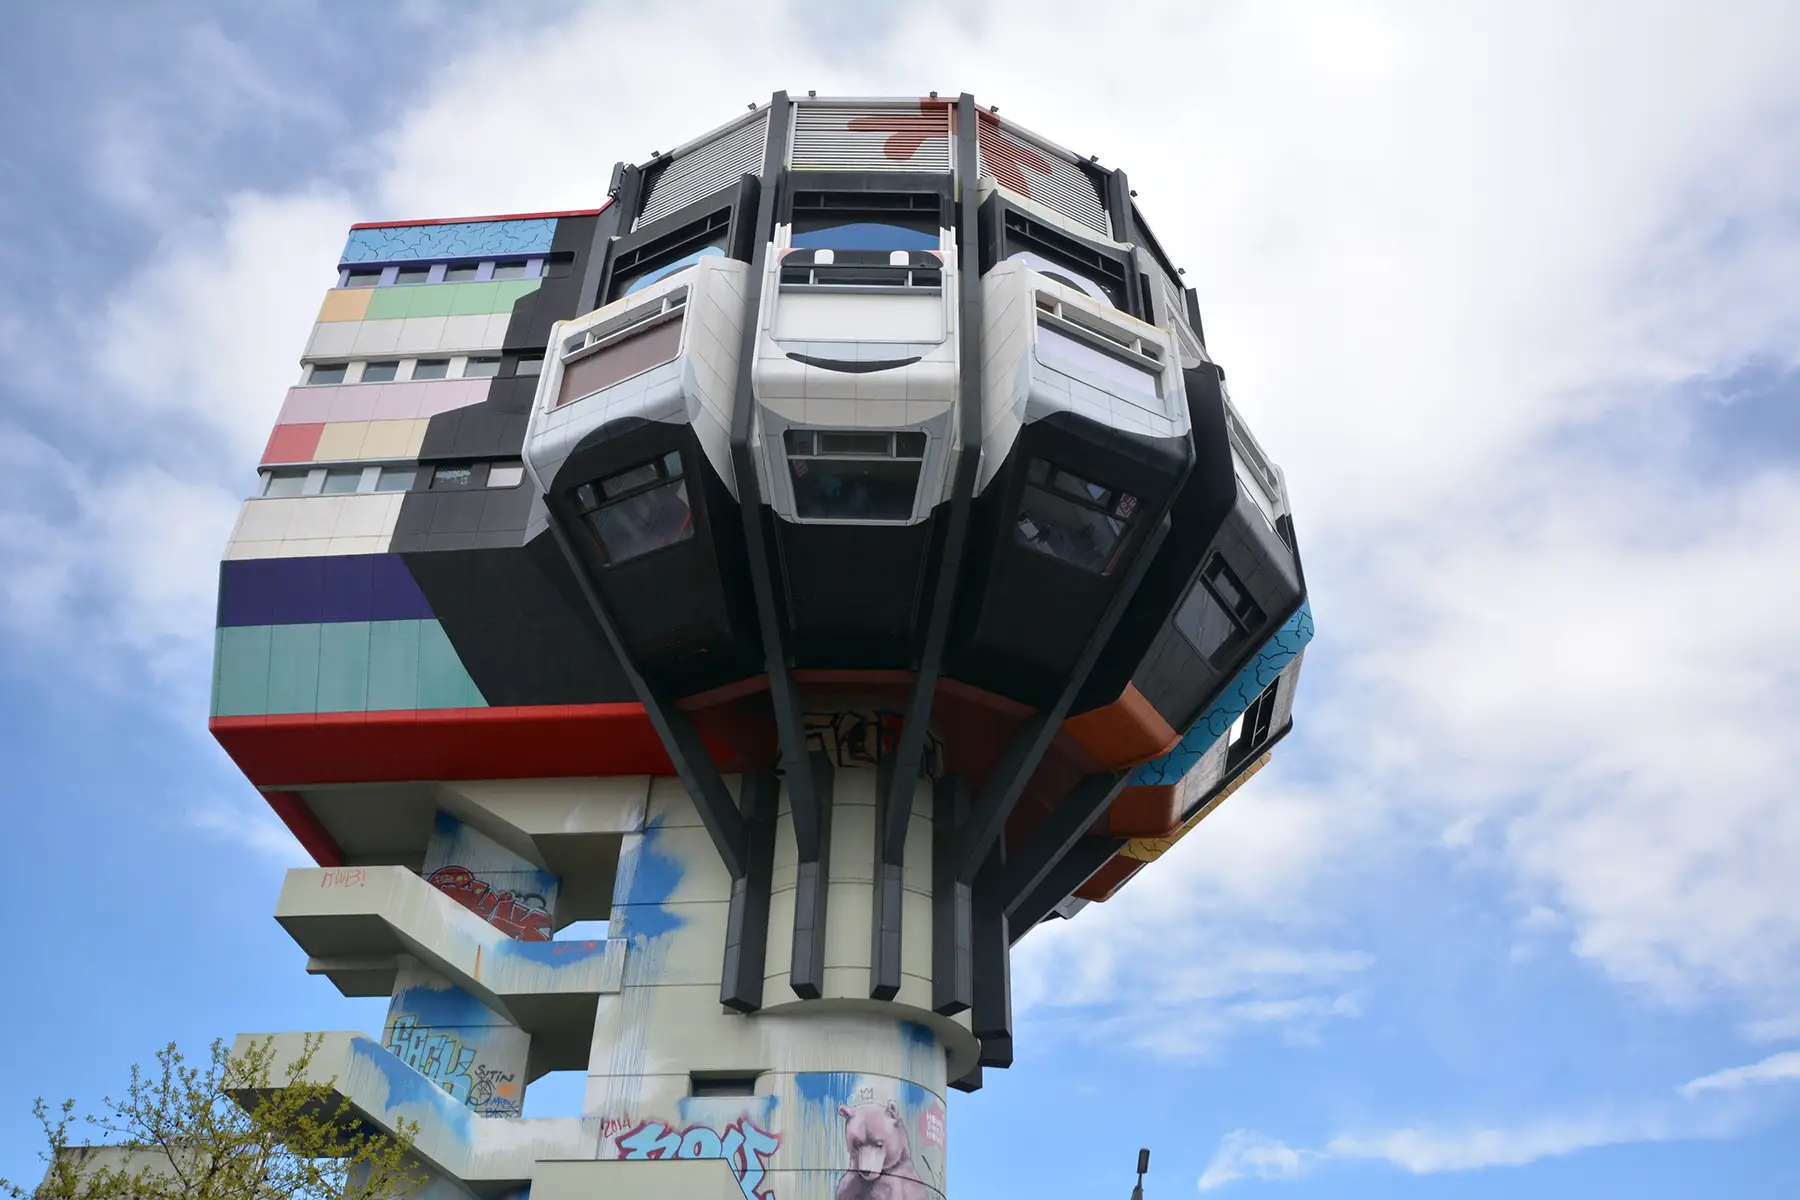 An unusual multicolored tower building with a hexagonal top in Steiglitz-Zehlendorf, Berlin